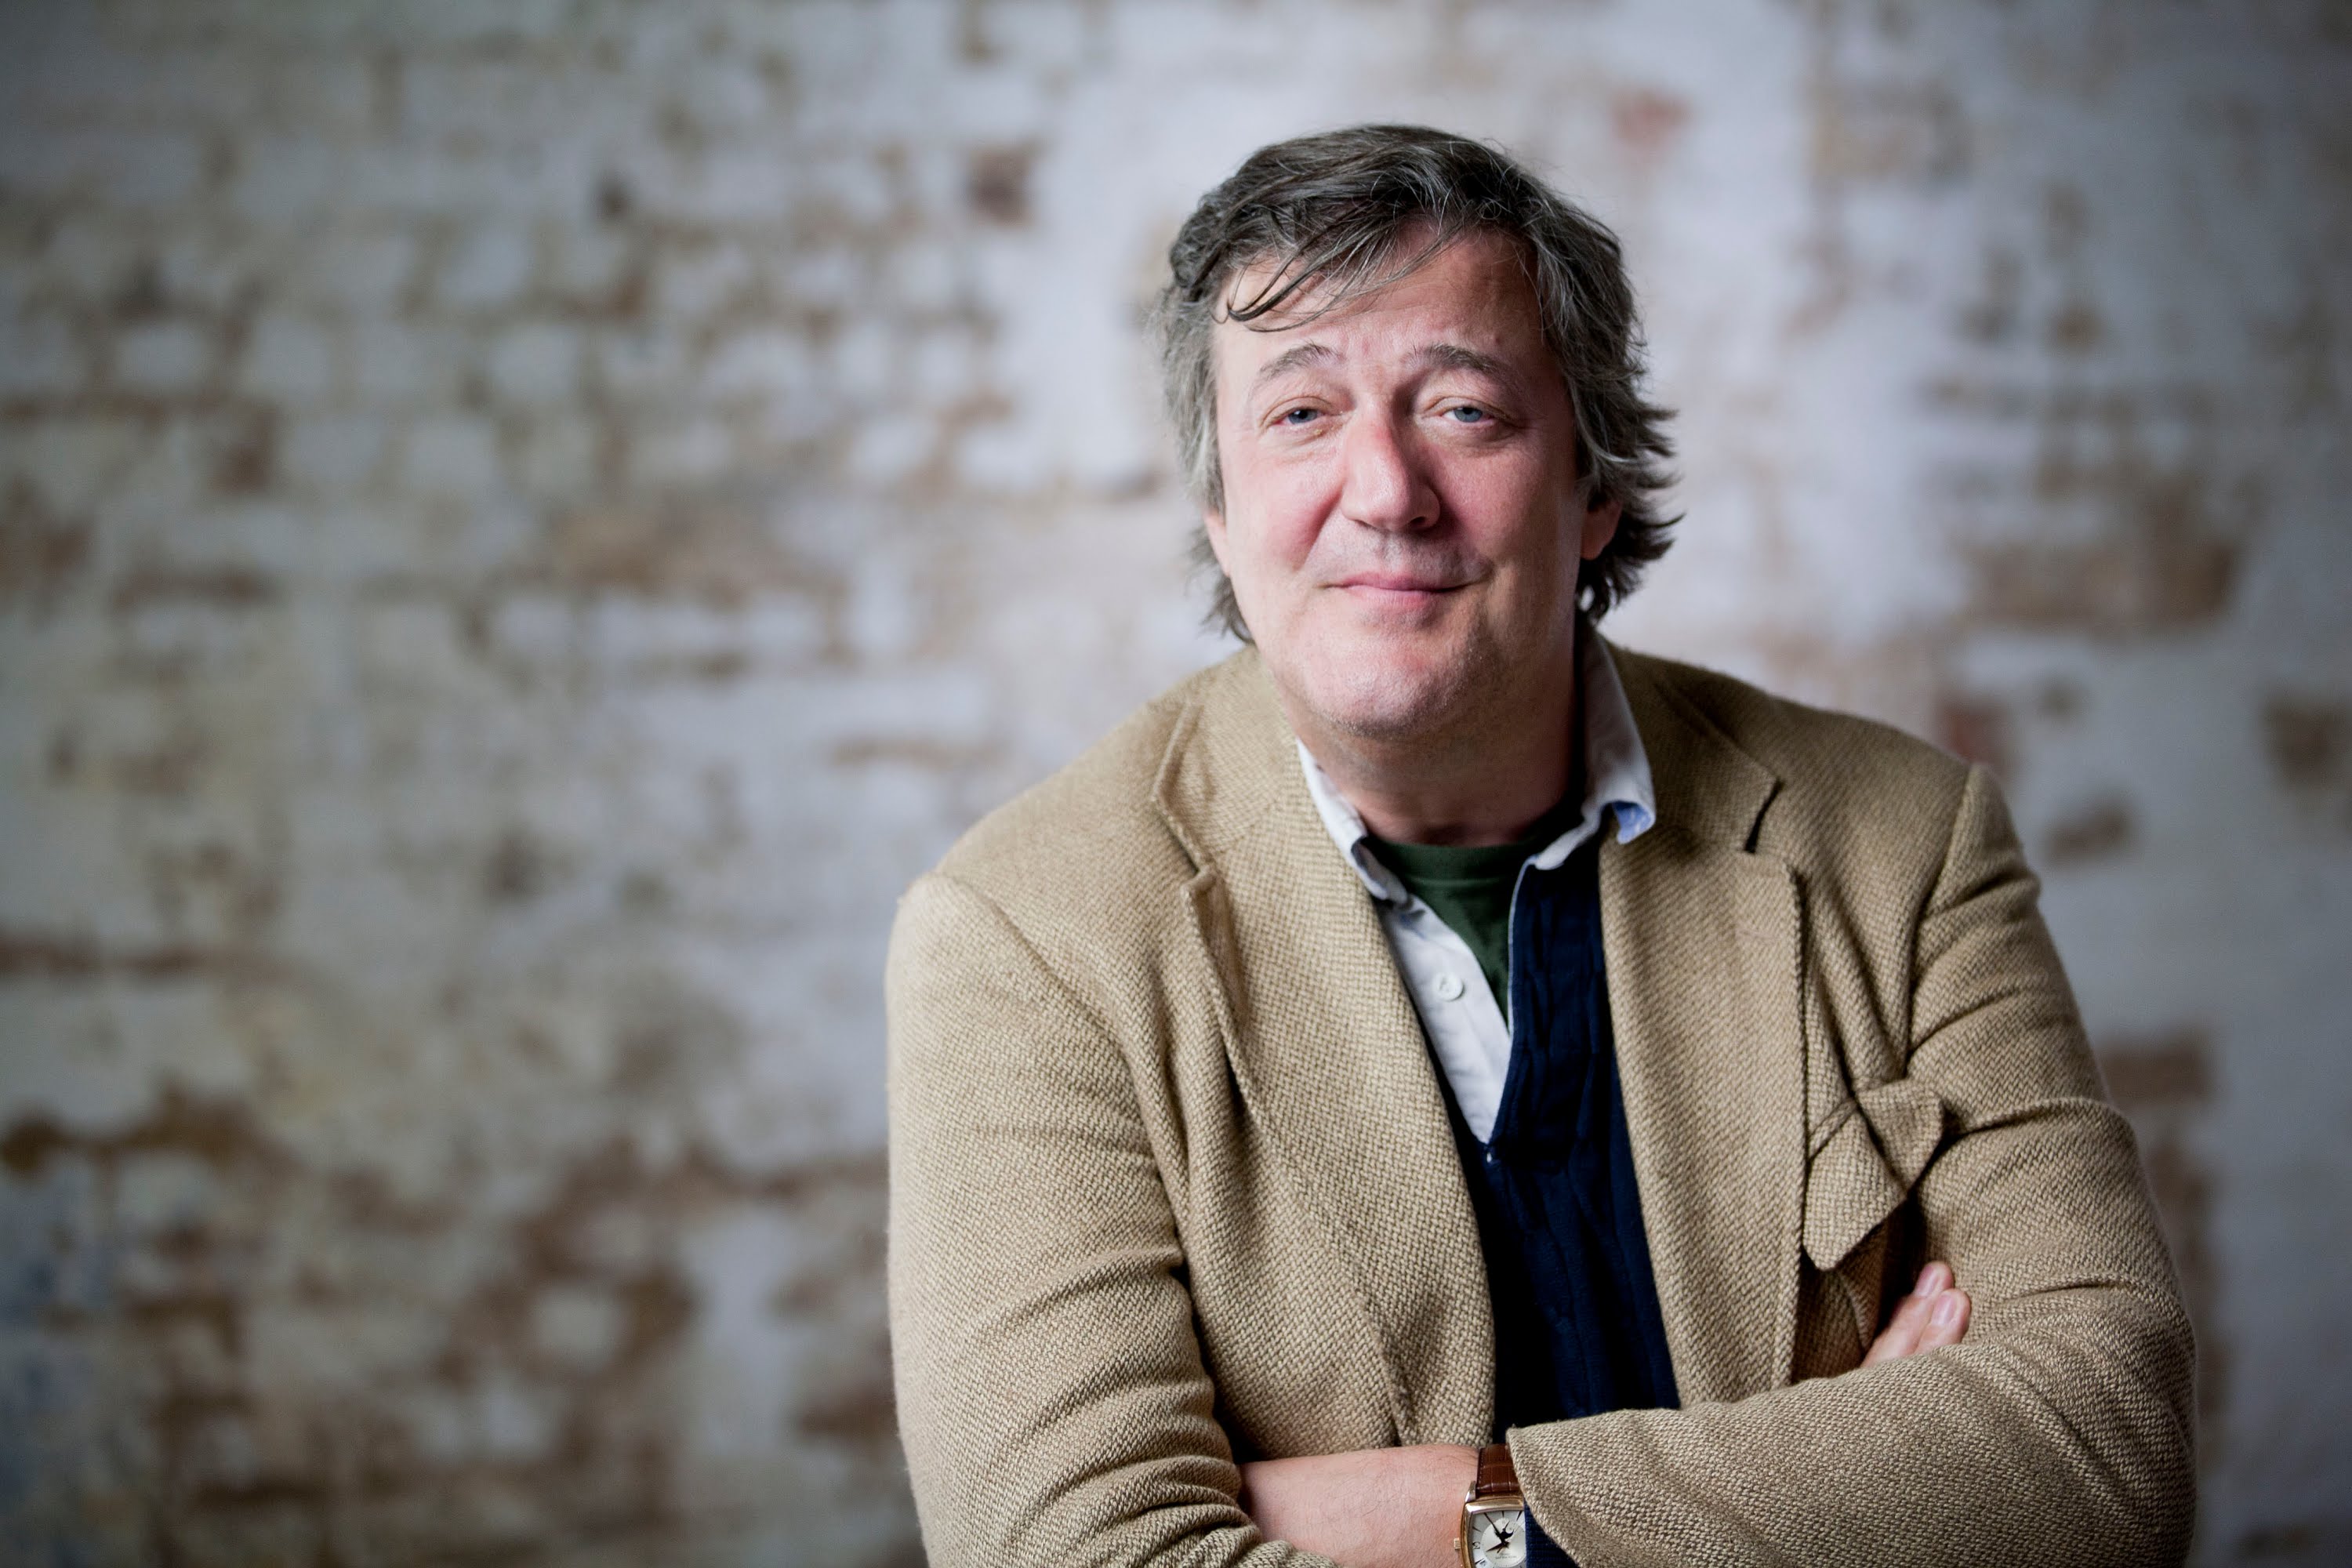 Stephen Fry describing our future with artificial intelligence and robots